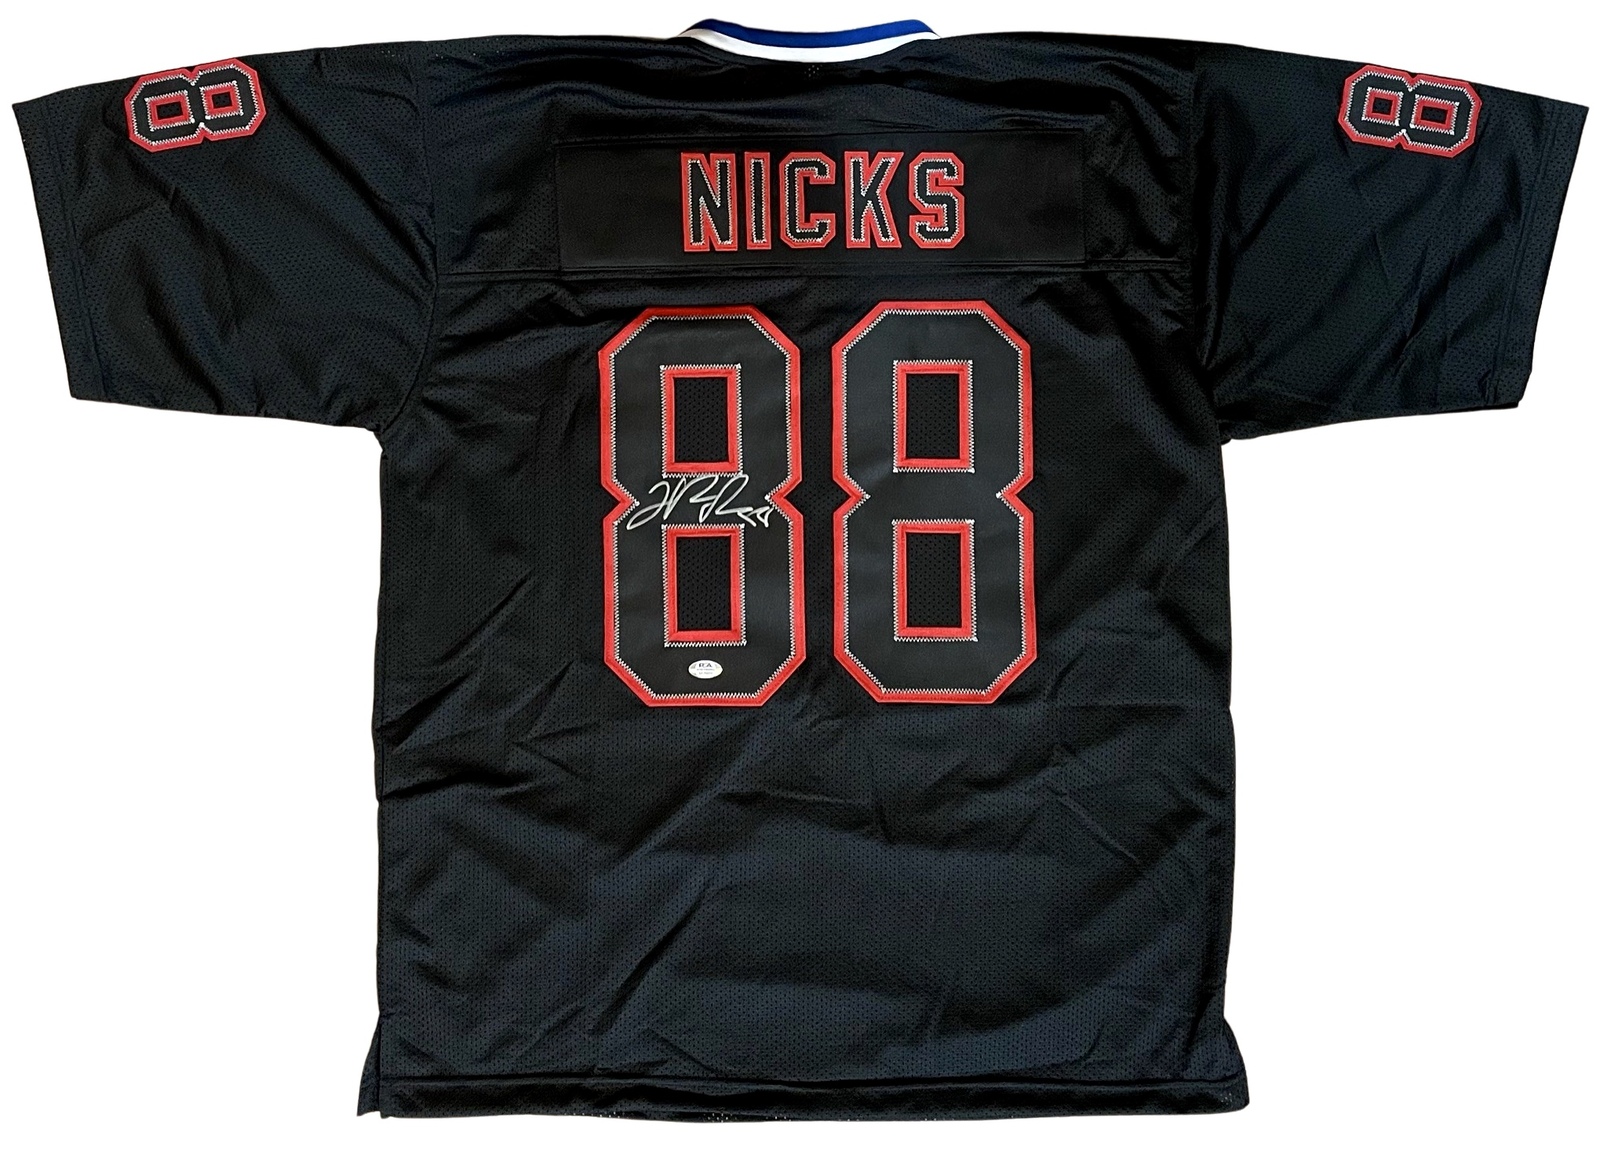 Primary image for HAKEEM NICKS Autograph SIGNED Custom BLACKOUT JERSEY PSA/DNA CERTIFIED GIANTS 